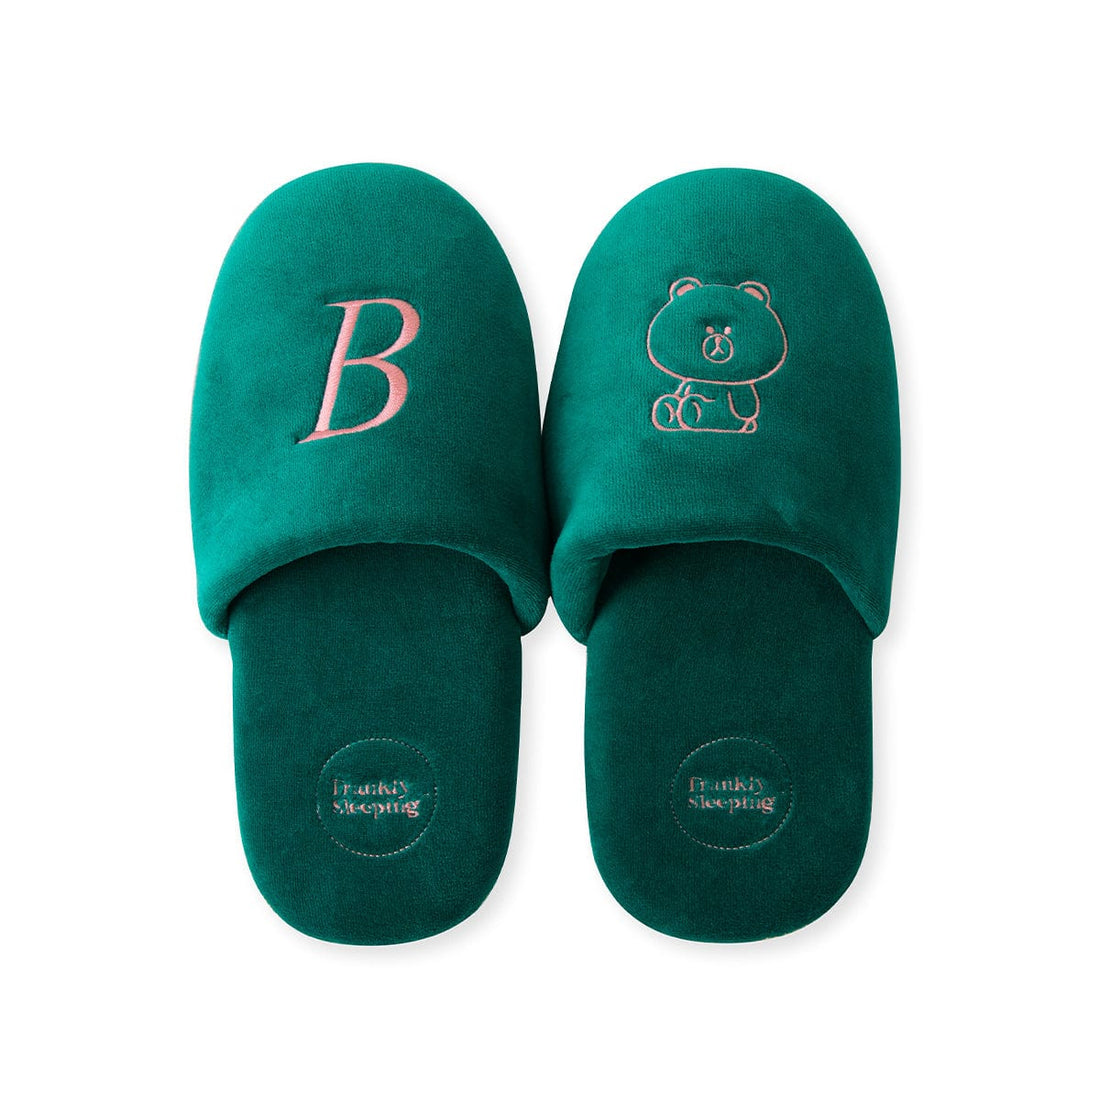 LINE FRIENDS FASHION BROWN LINE FRIENDS FRANKLY SLEEPING BROWN HOUSE SLIPPERS